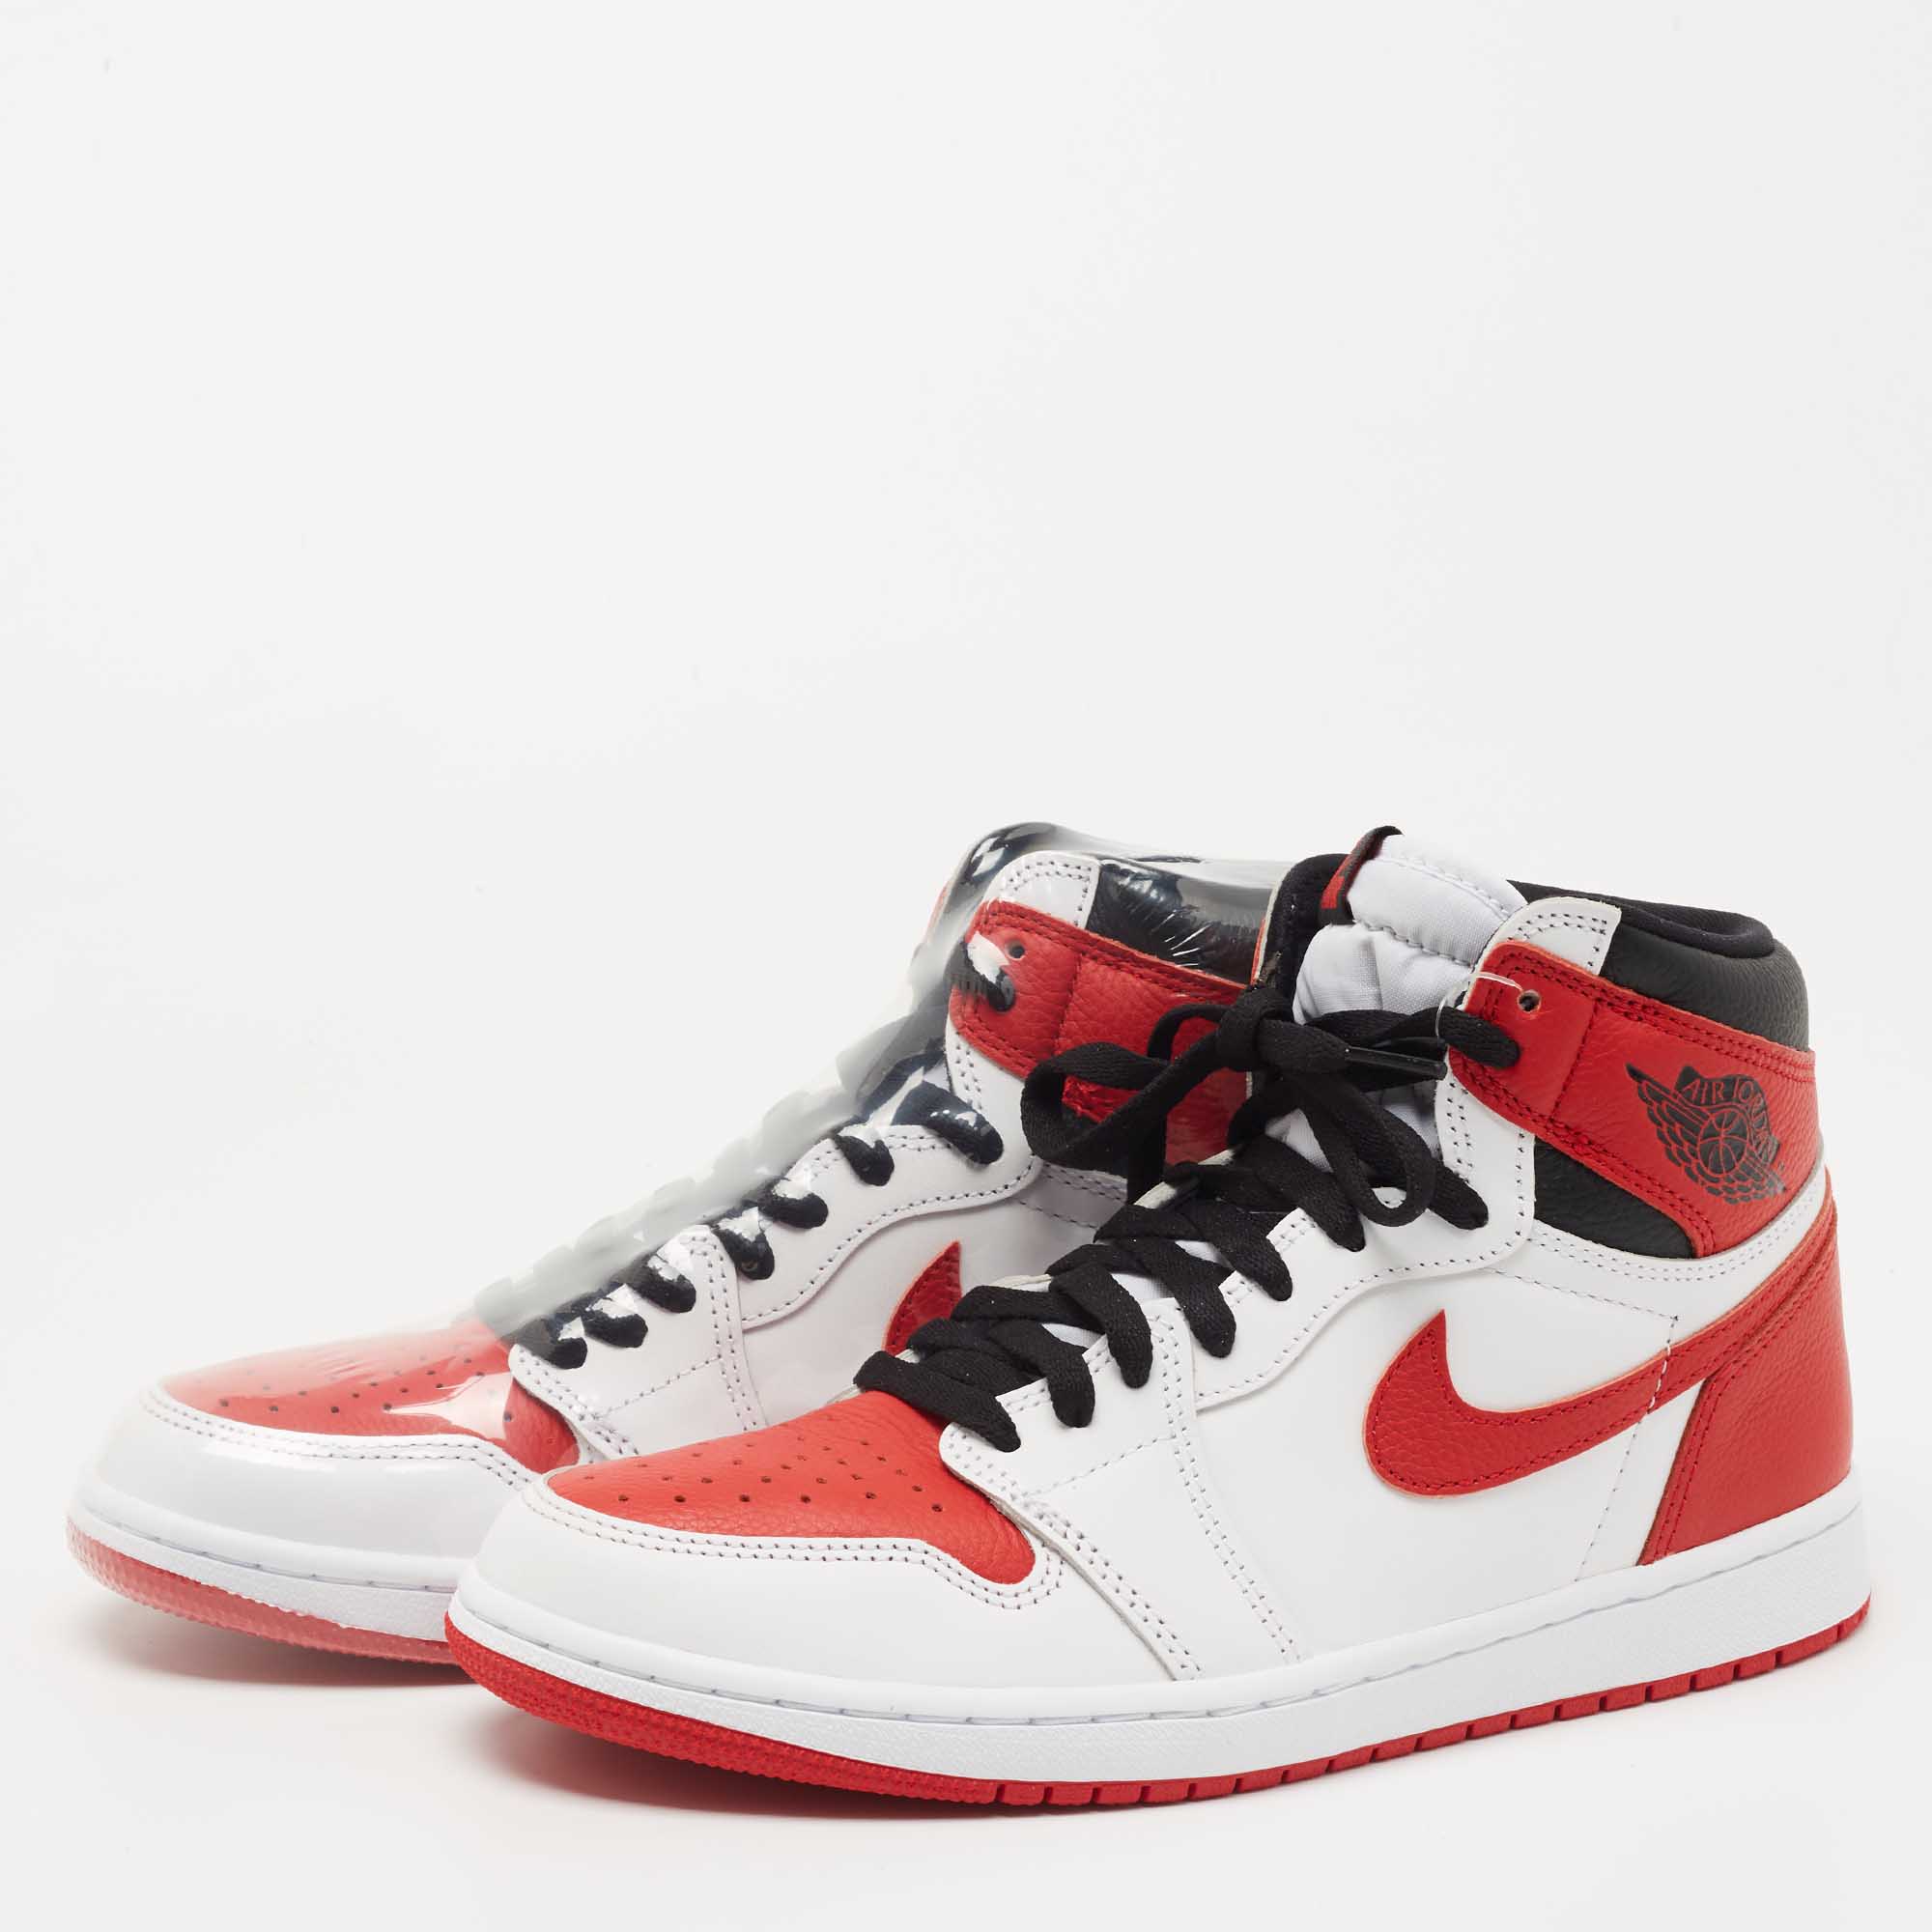 

Air Jordan 1 Tricolor Leather OG Heritage High Top Sneakers Size, Red